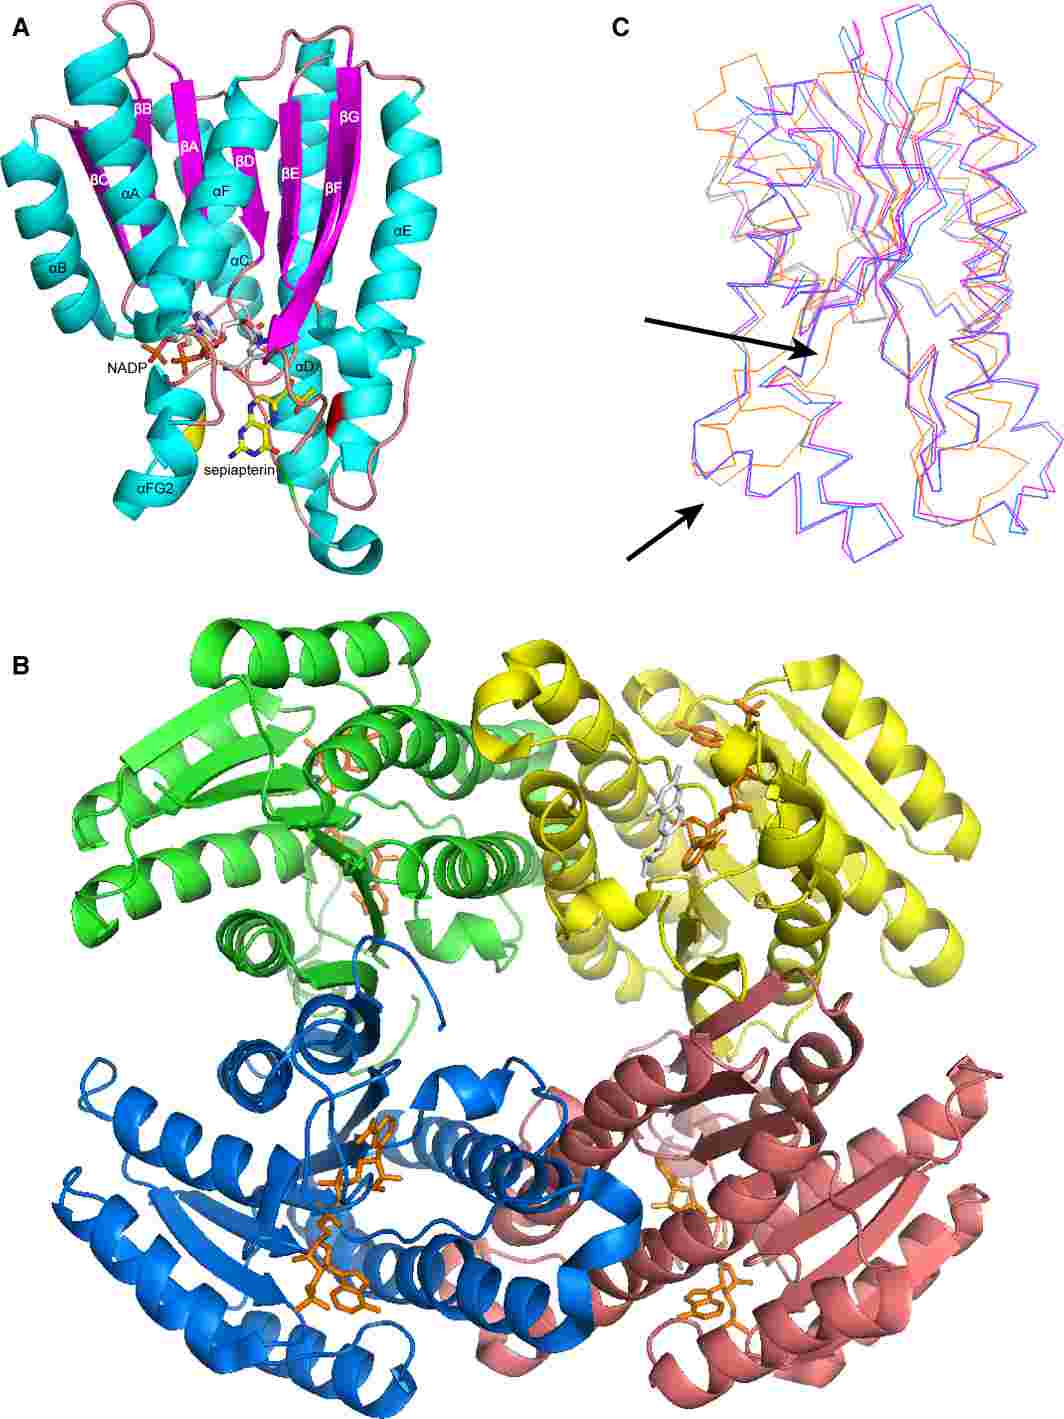 The overall structure of CT-SPR. (Wu, Y., et al. 2020)